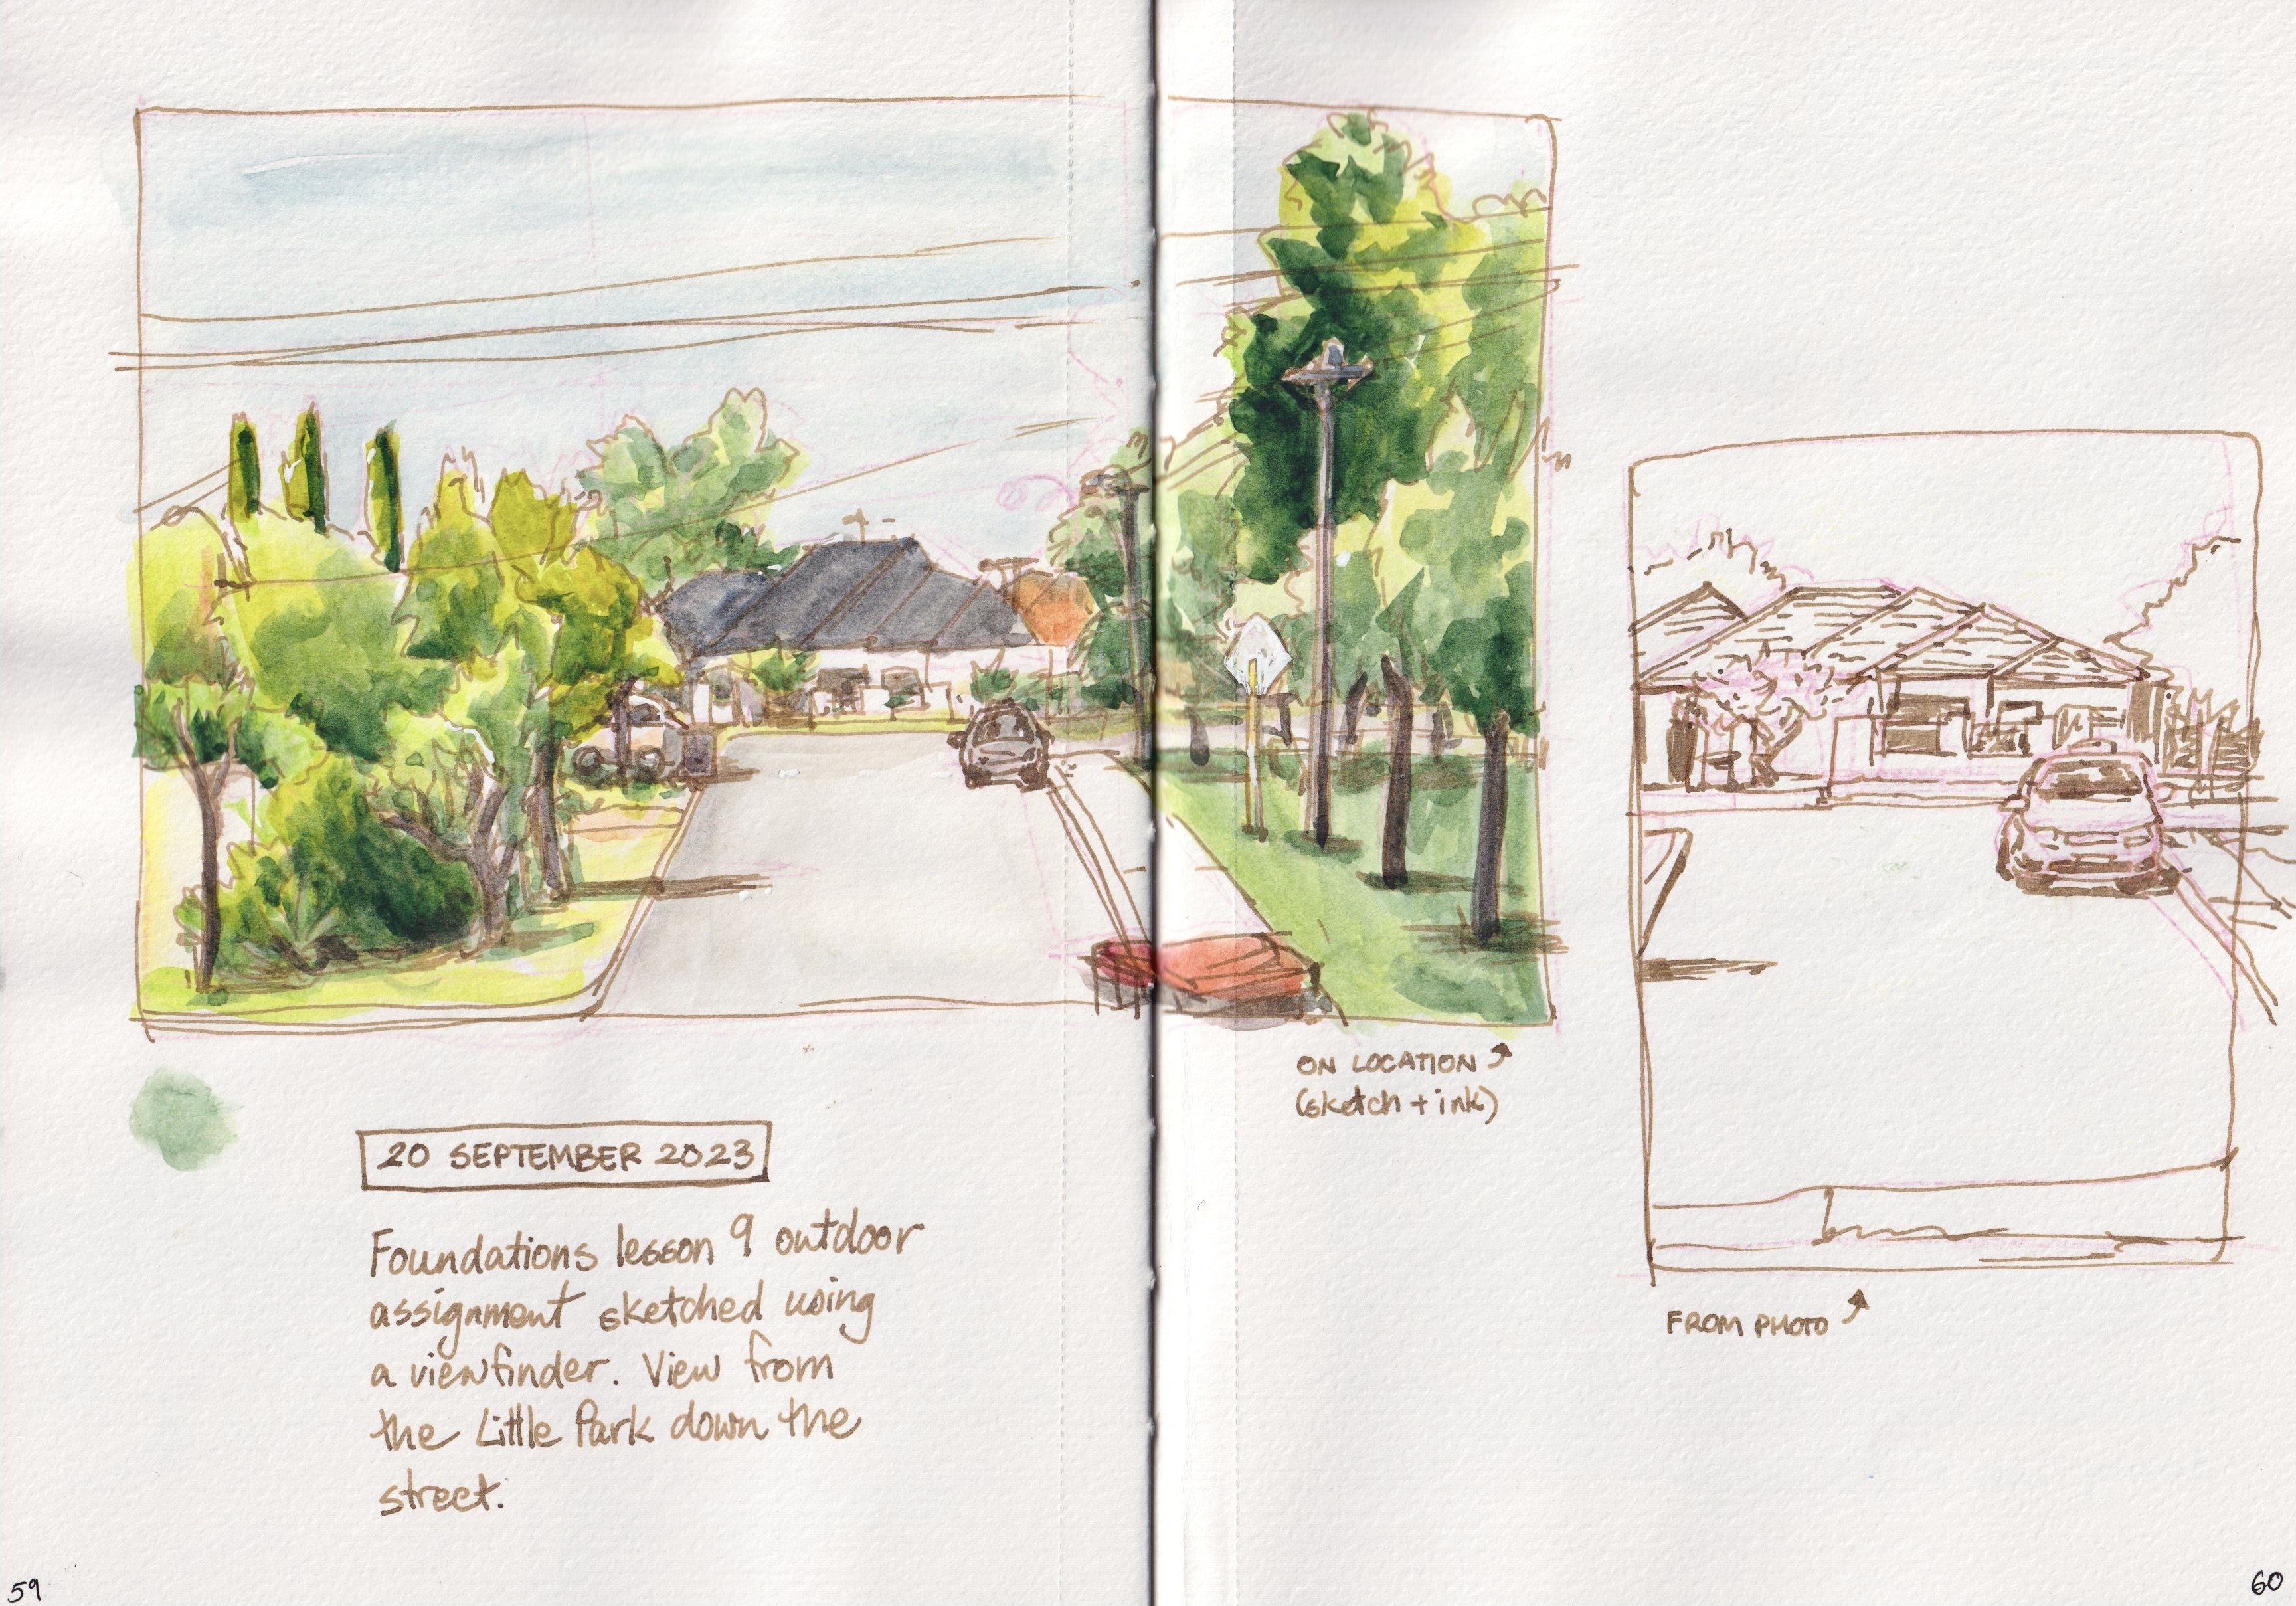 sketchbook3 8.jpeg|watercolour sketch of a view down the street